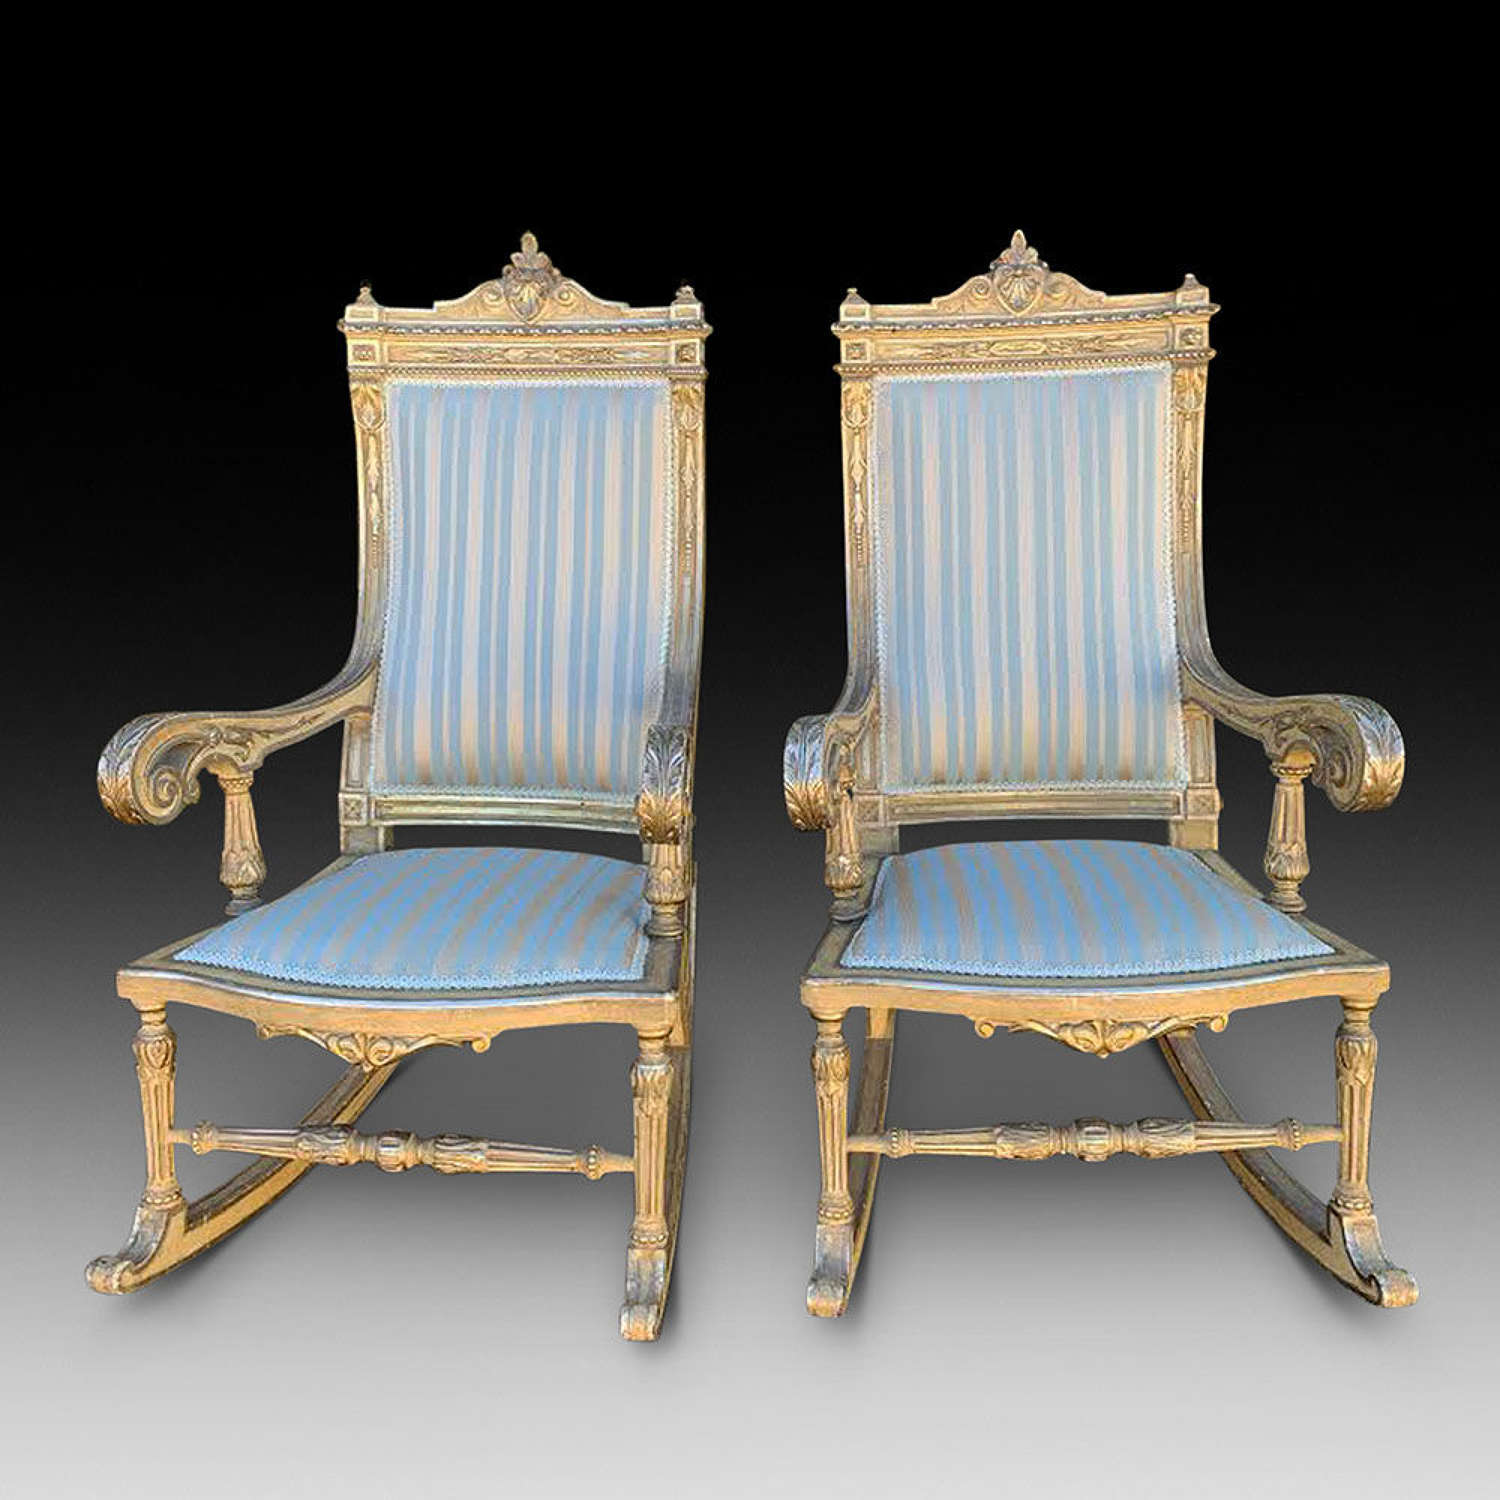 Very Unusual %26 Good Quality Pair of Period Gilt %26 Upholstered Rock